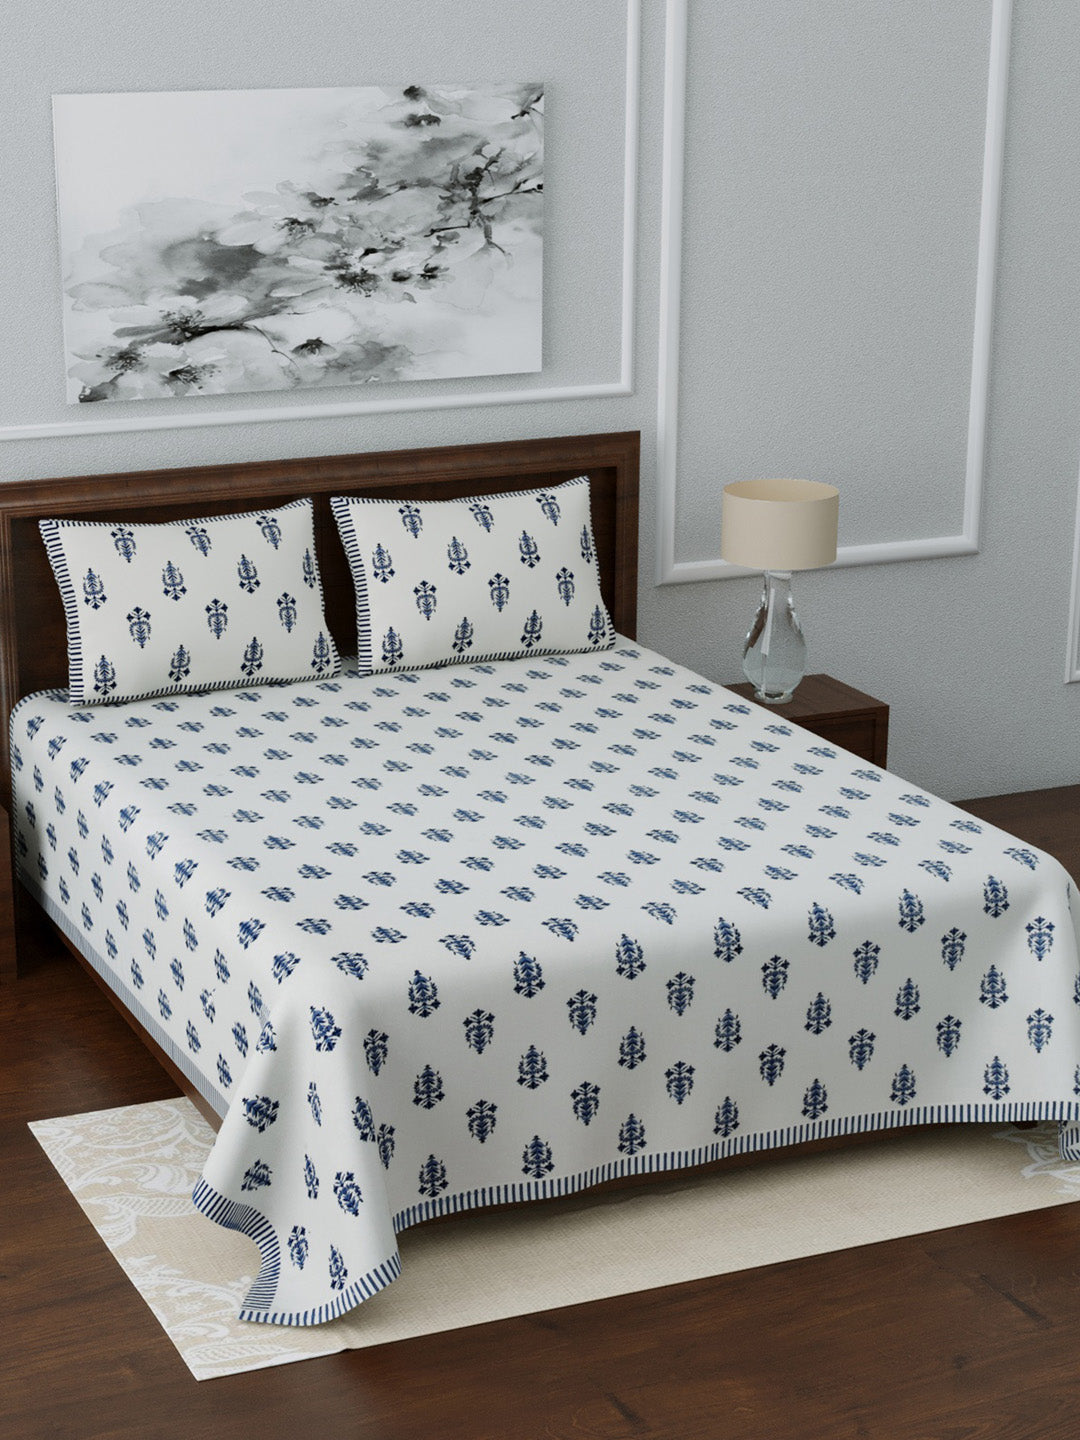 LIVING ROOTS Double Bedsheet King Size Blue Colour Pure Cotton - 1 Bedsheet with 2 Pillow Covers (31-051-C)